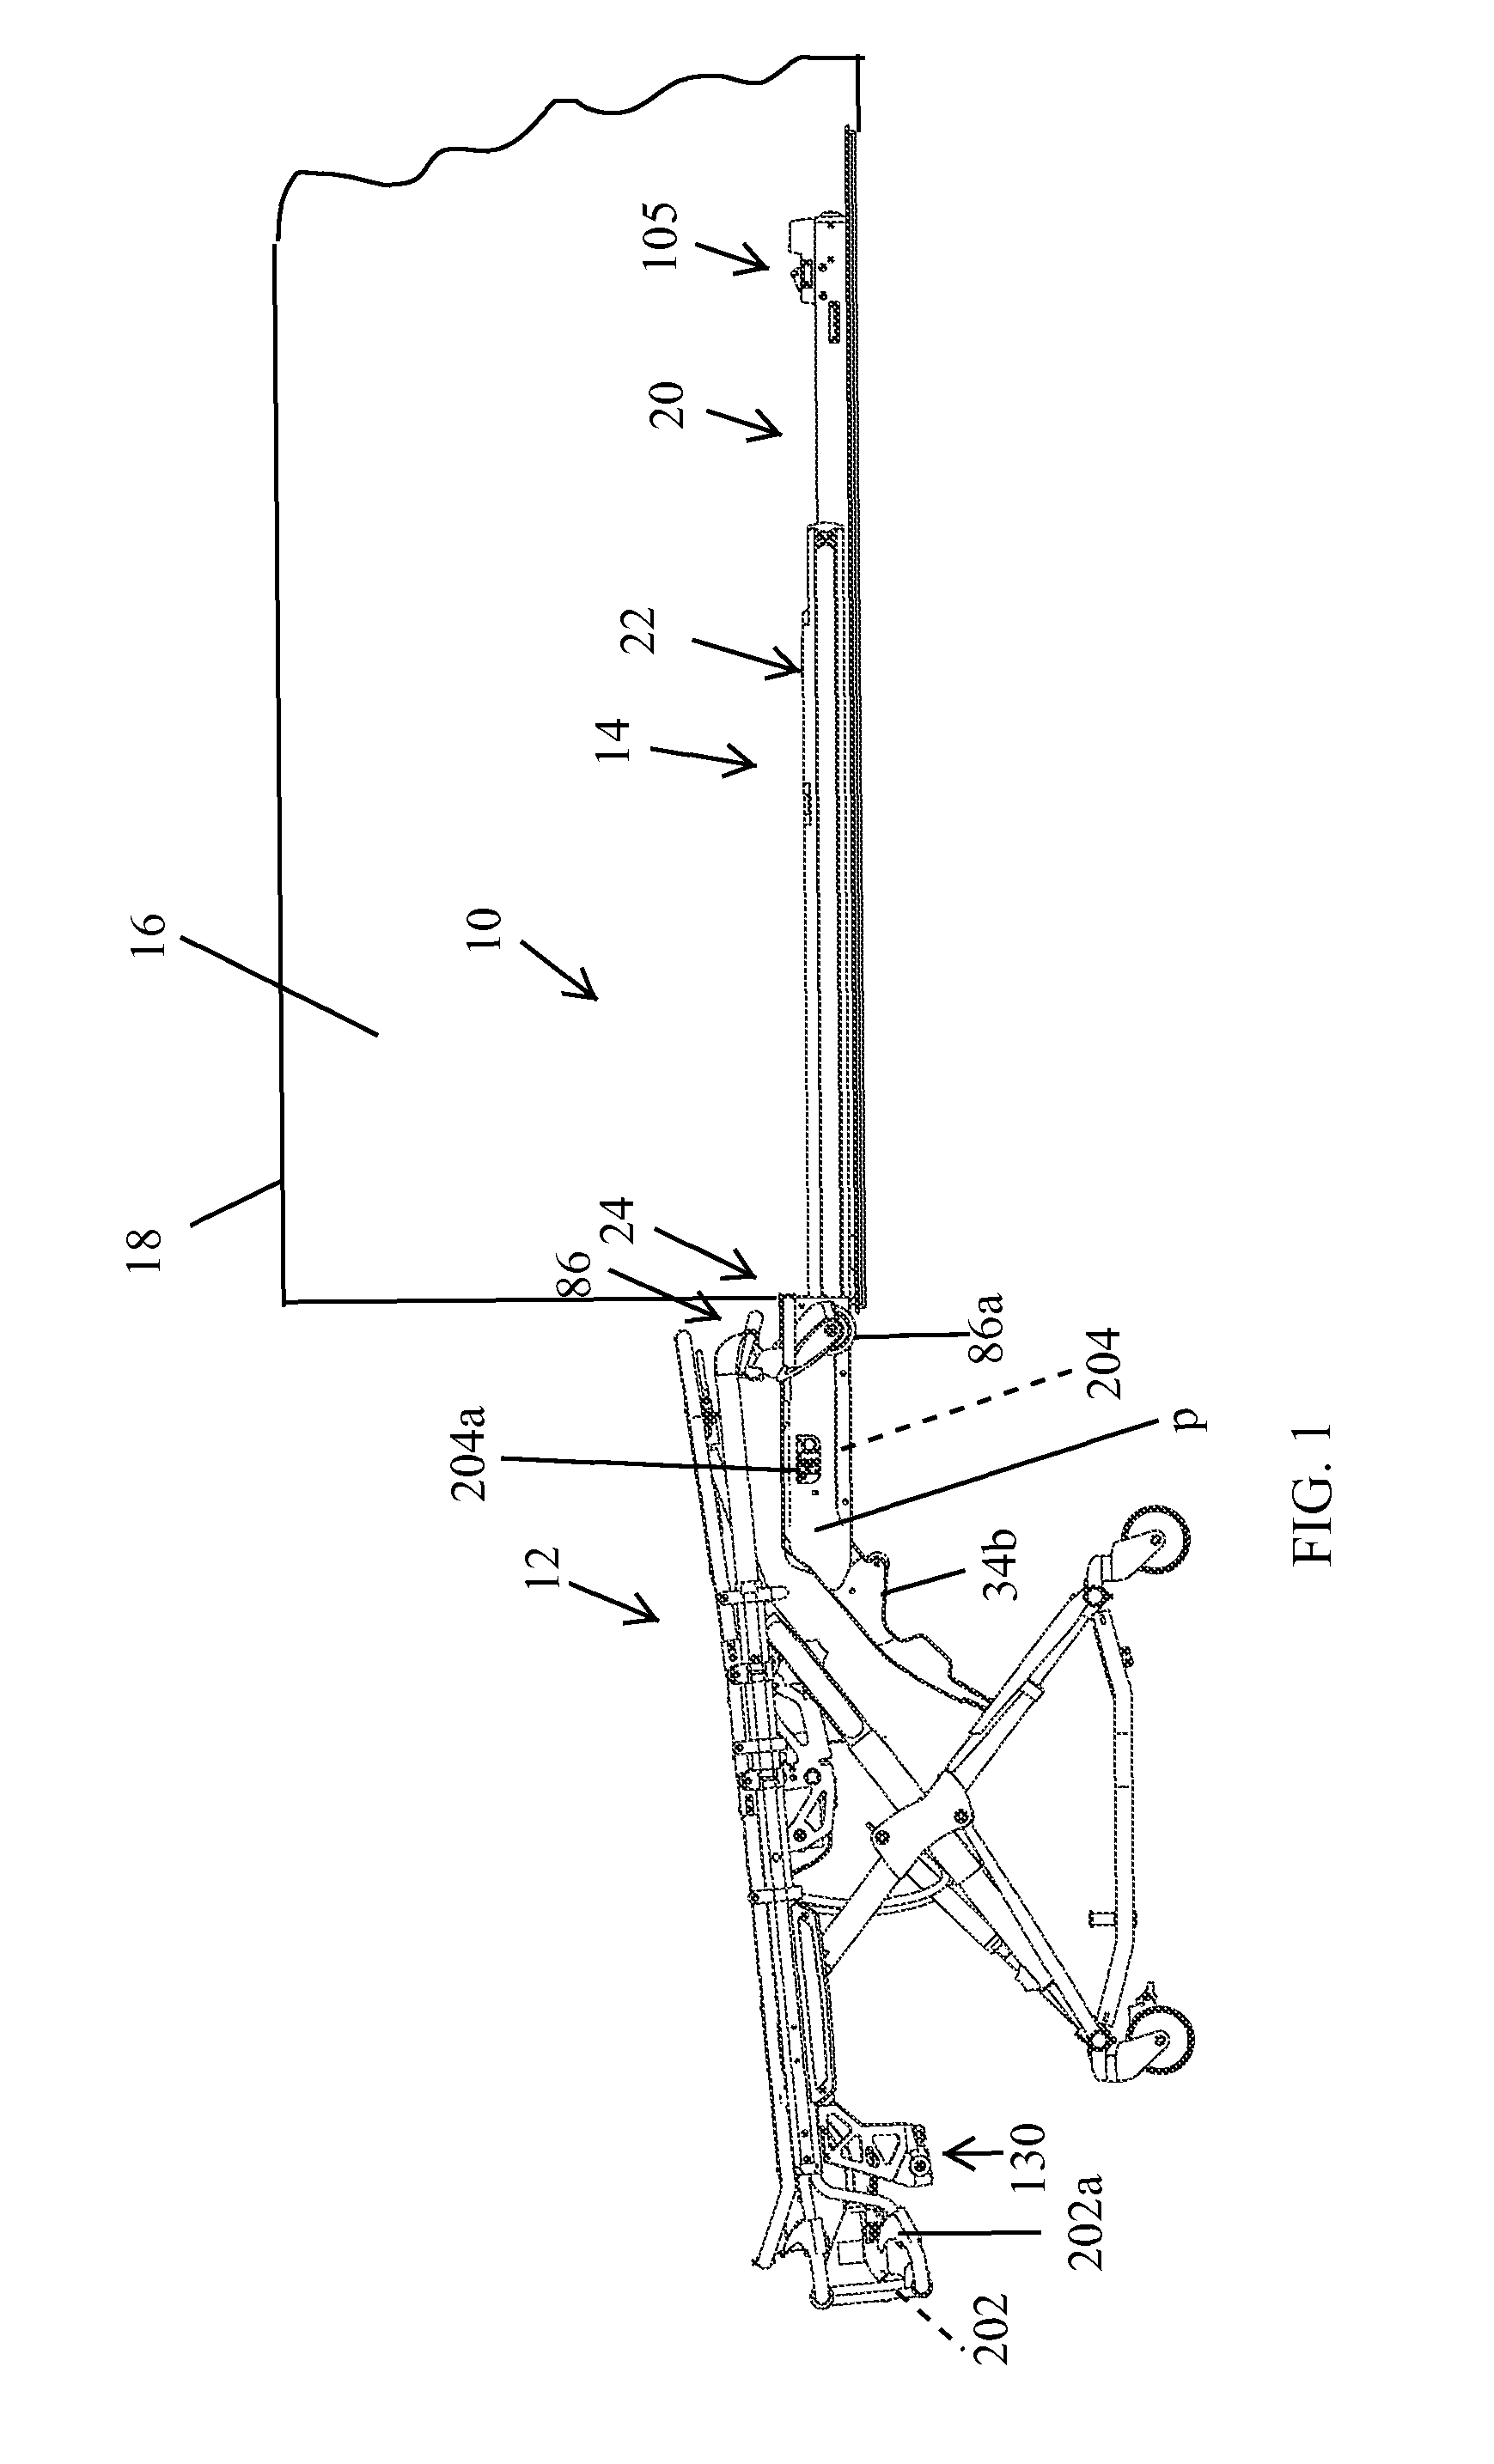 Ambulance cot and loading and unloading system